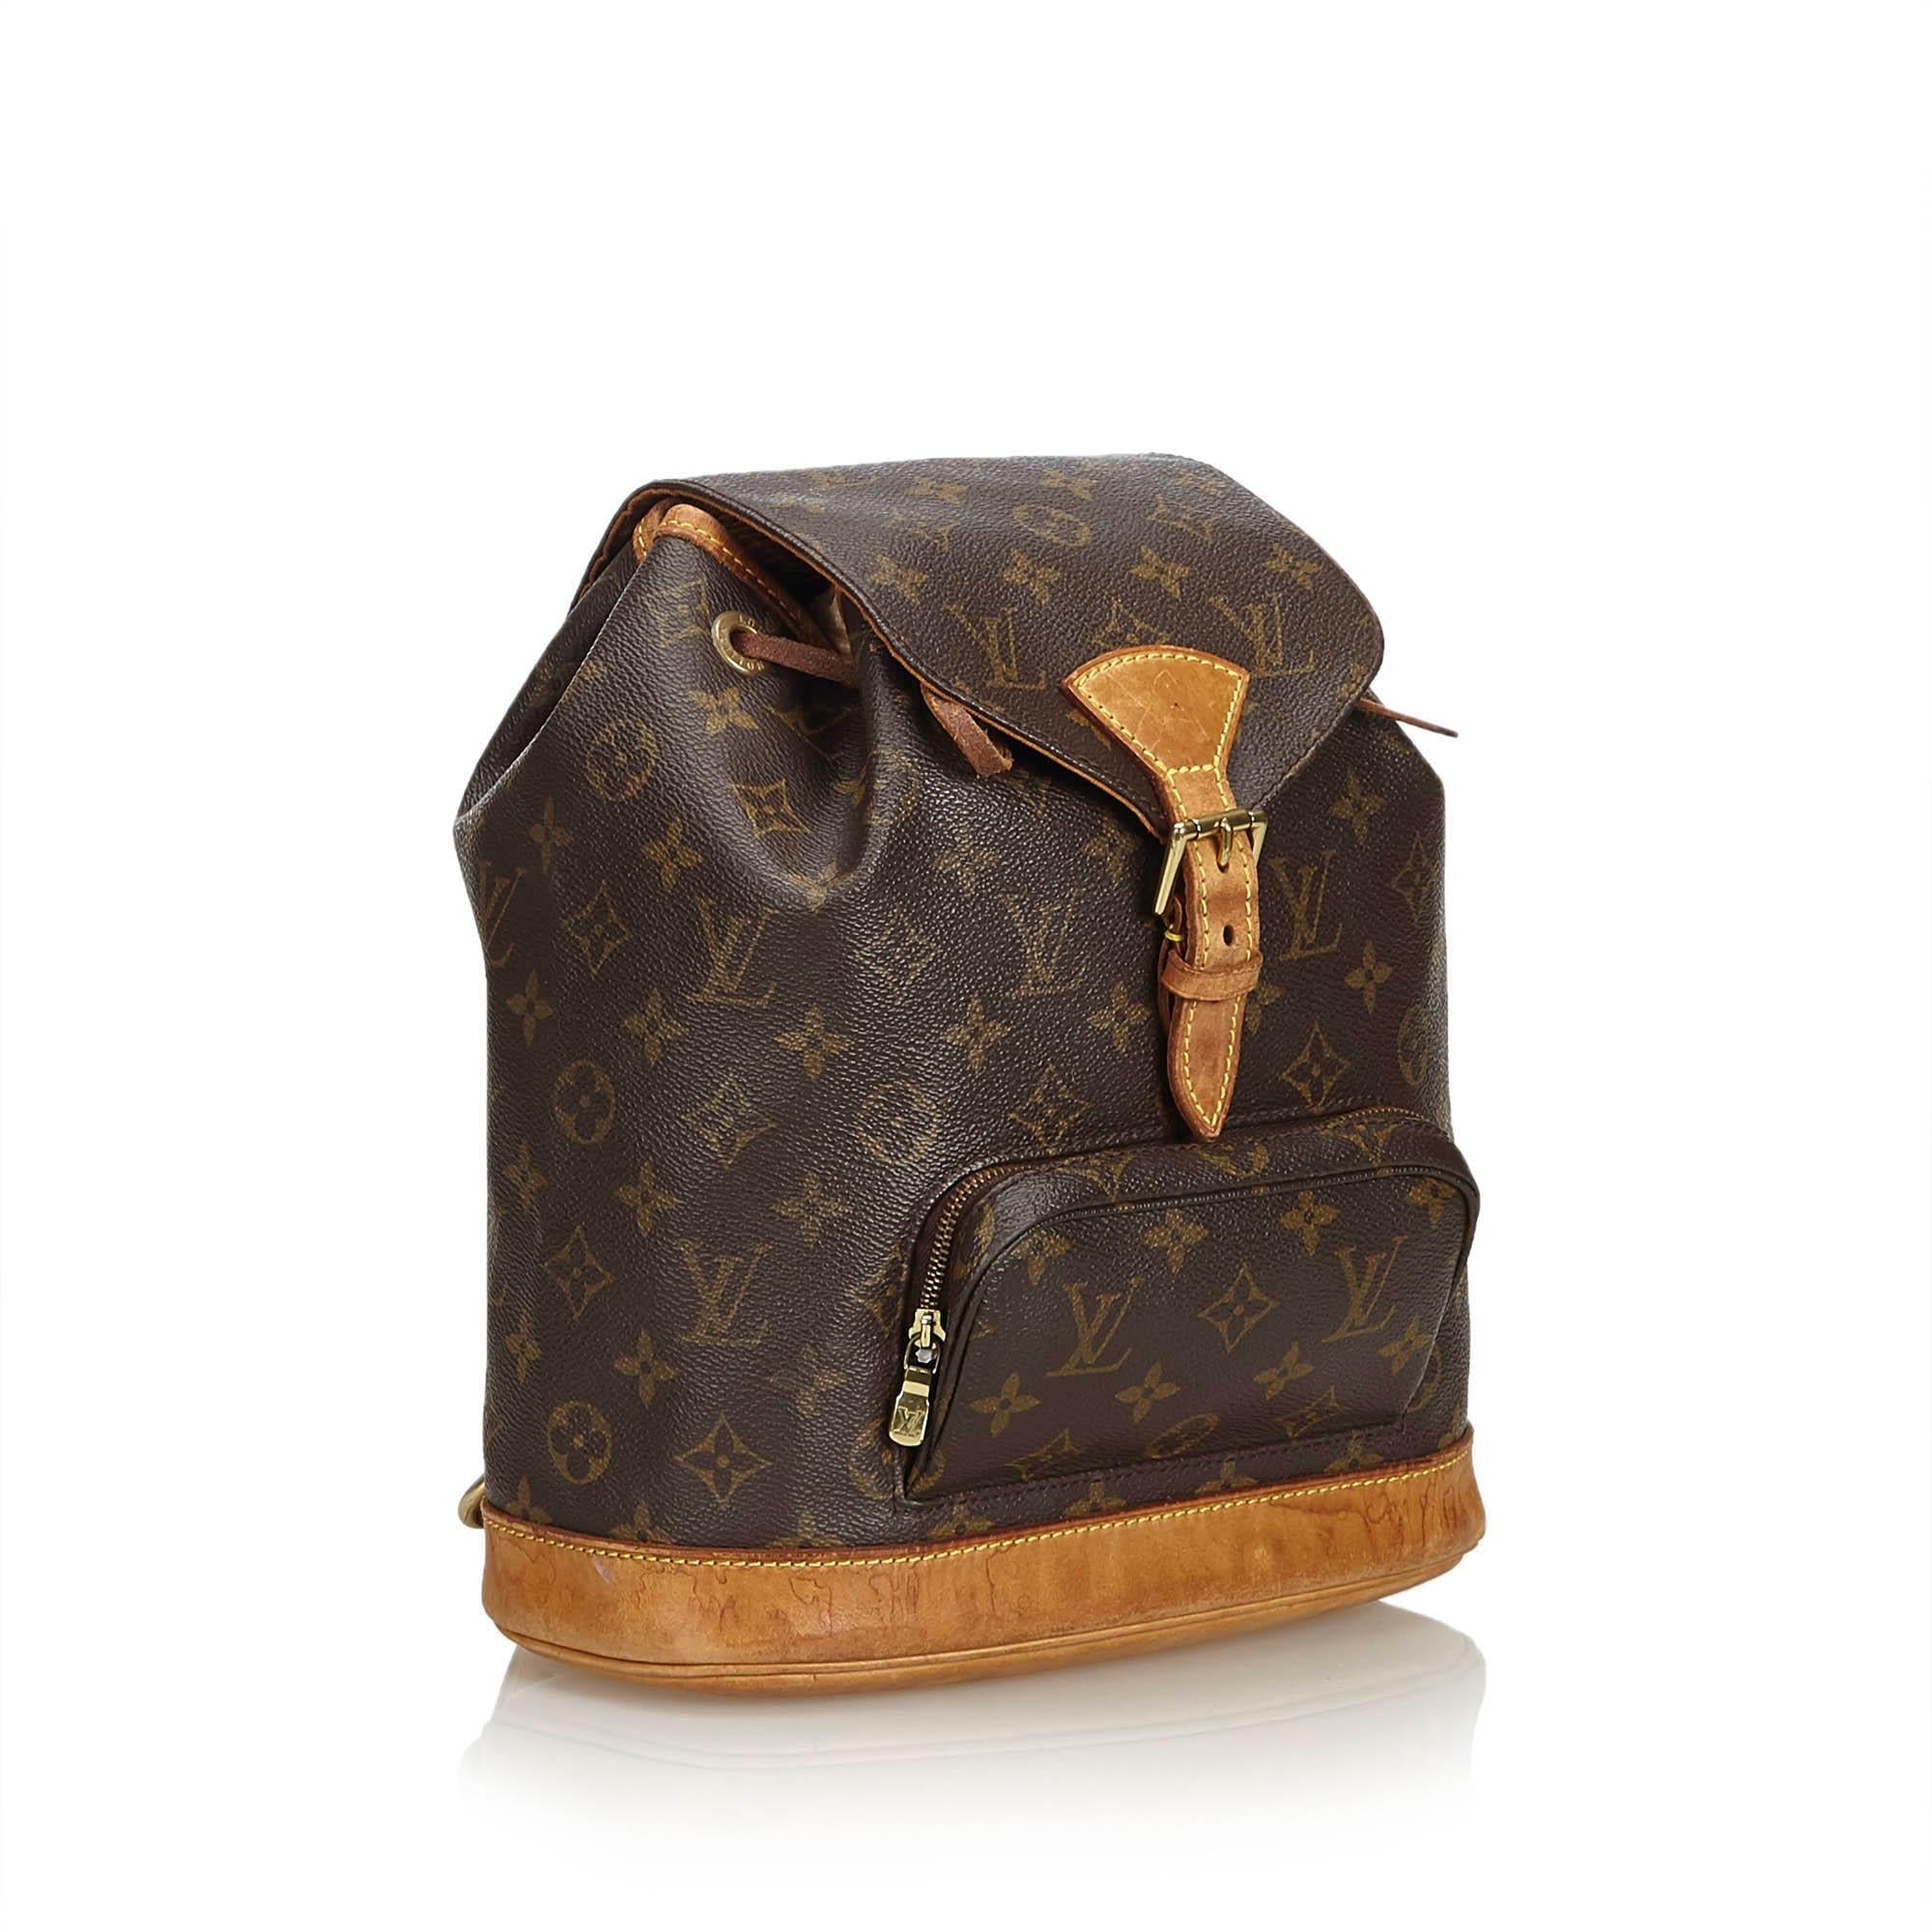 The Montsouris MM features a monogram canvas body, flat shoulder straps, a leather bottom, a front flap with a belt buckle detail and a magnetic closure, a top drawstring closure, and an interior slip pocket. It carries as B condition